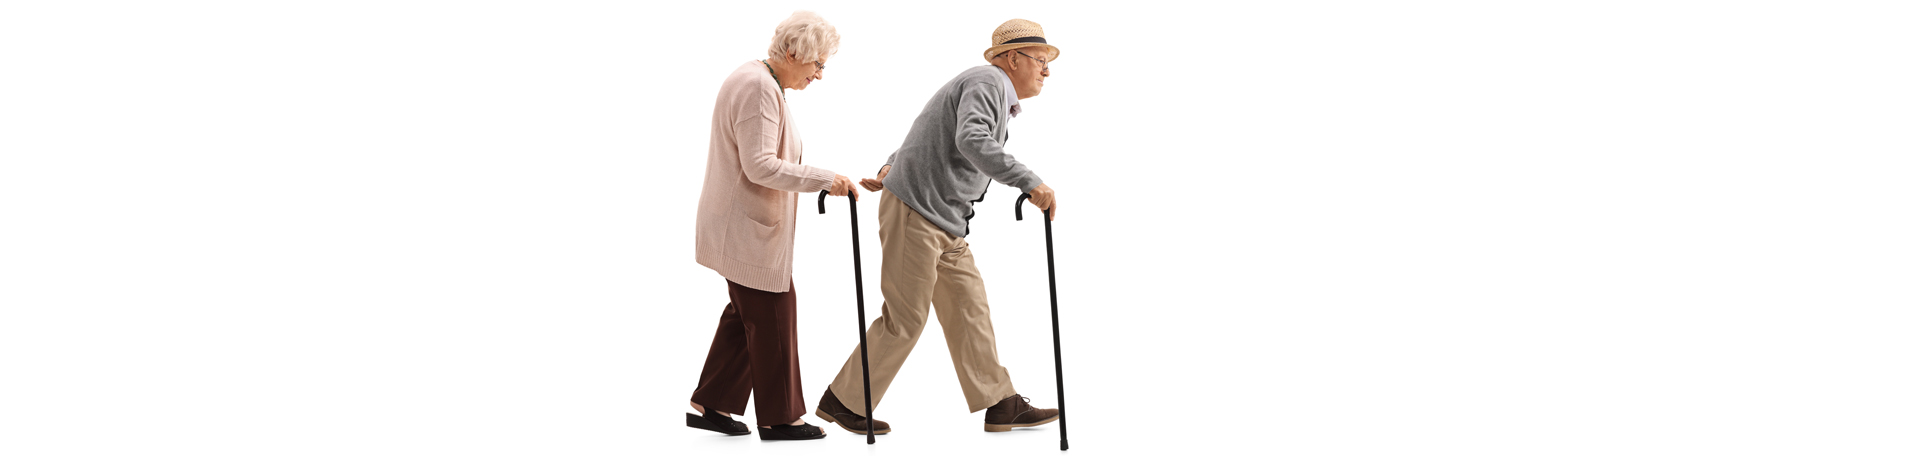 Nashua back pain affects gait and walking patterns